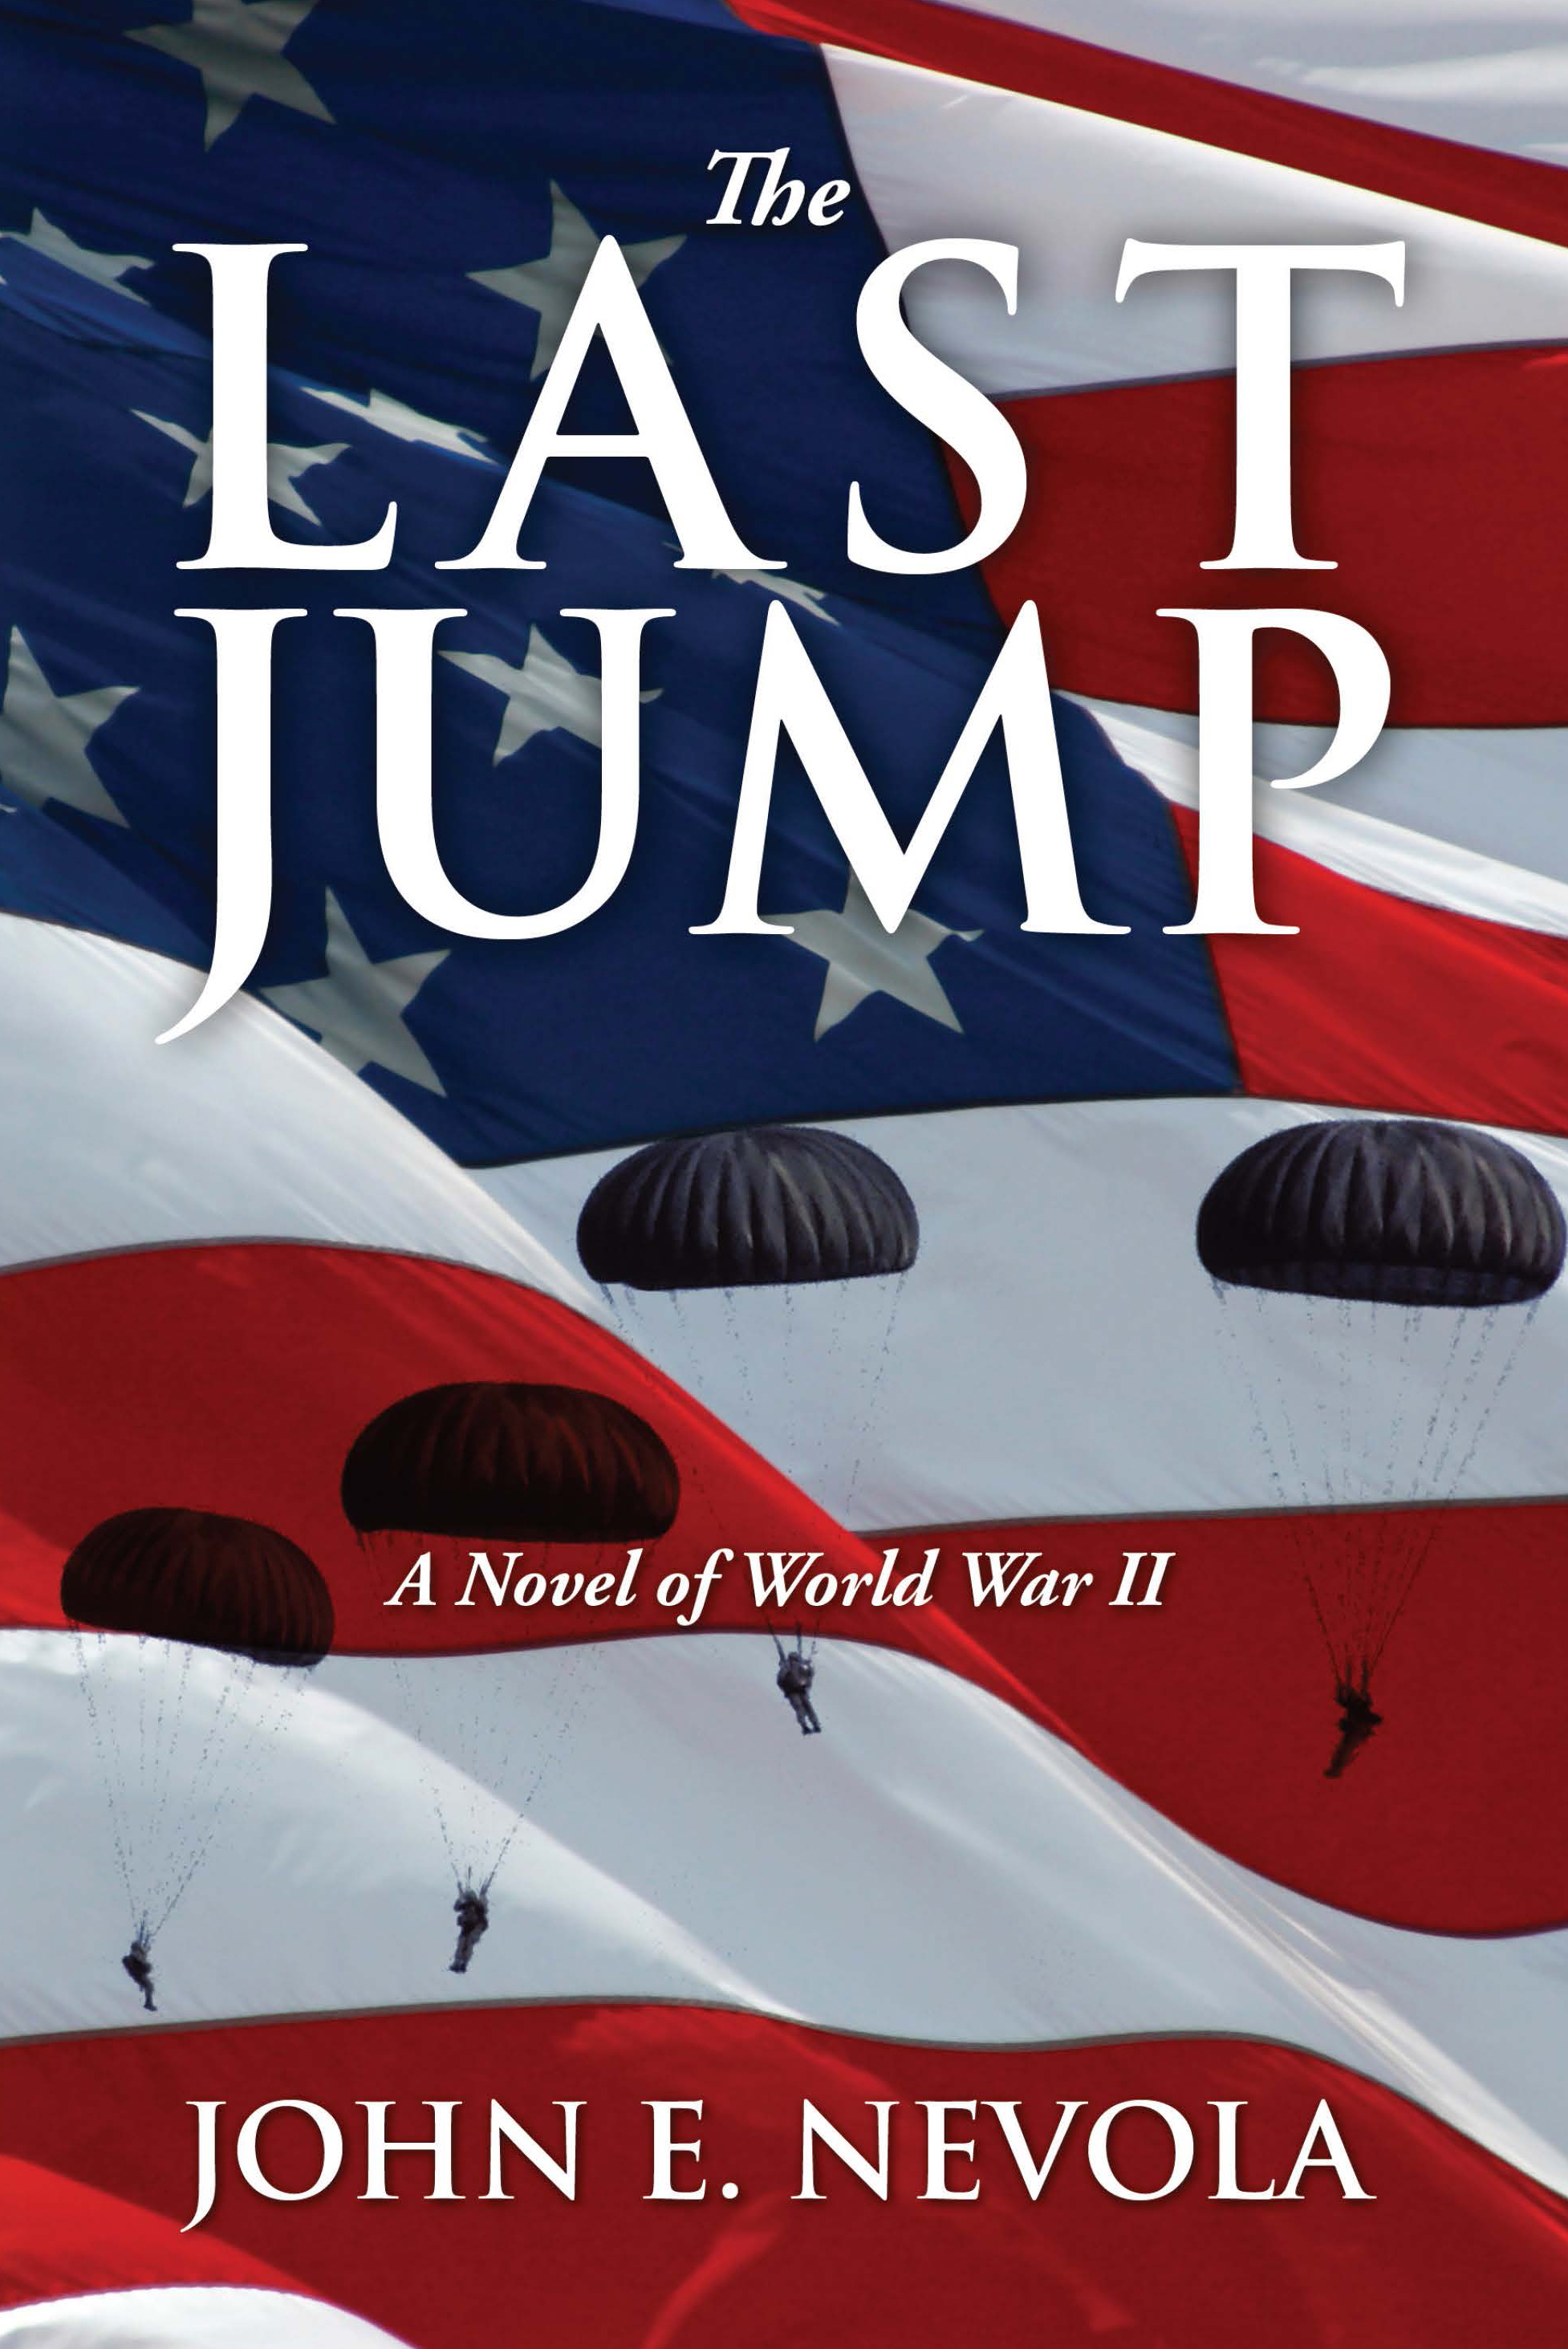 Self-published author John E. Nevola’s book The Last Jump published by Outskirts Press